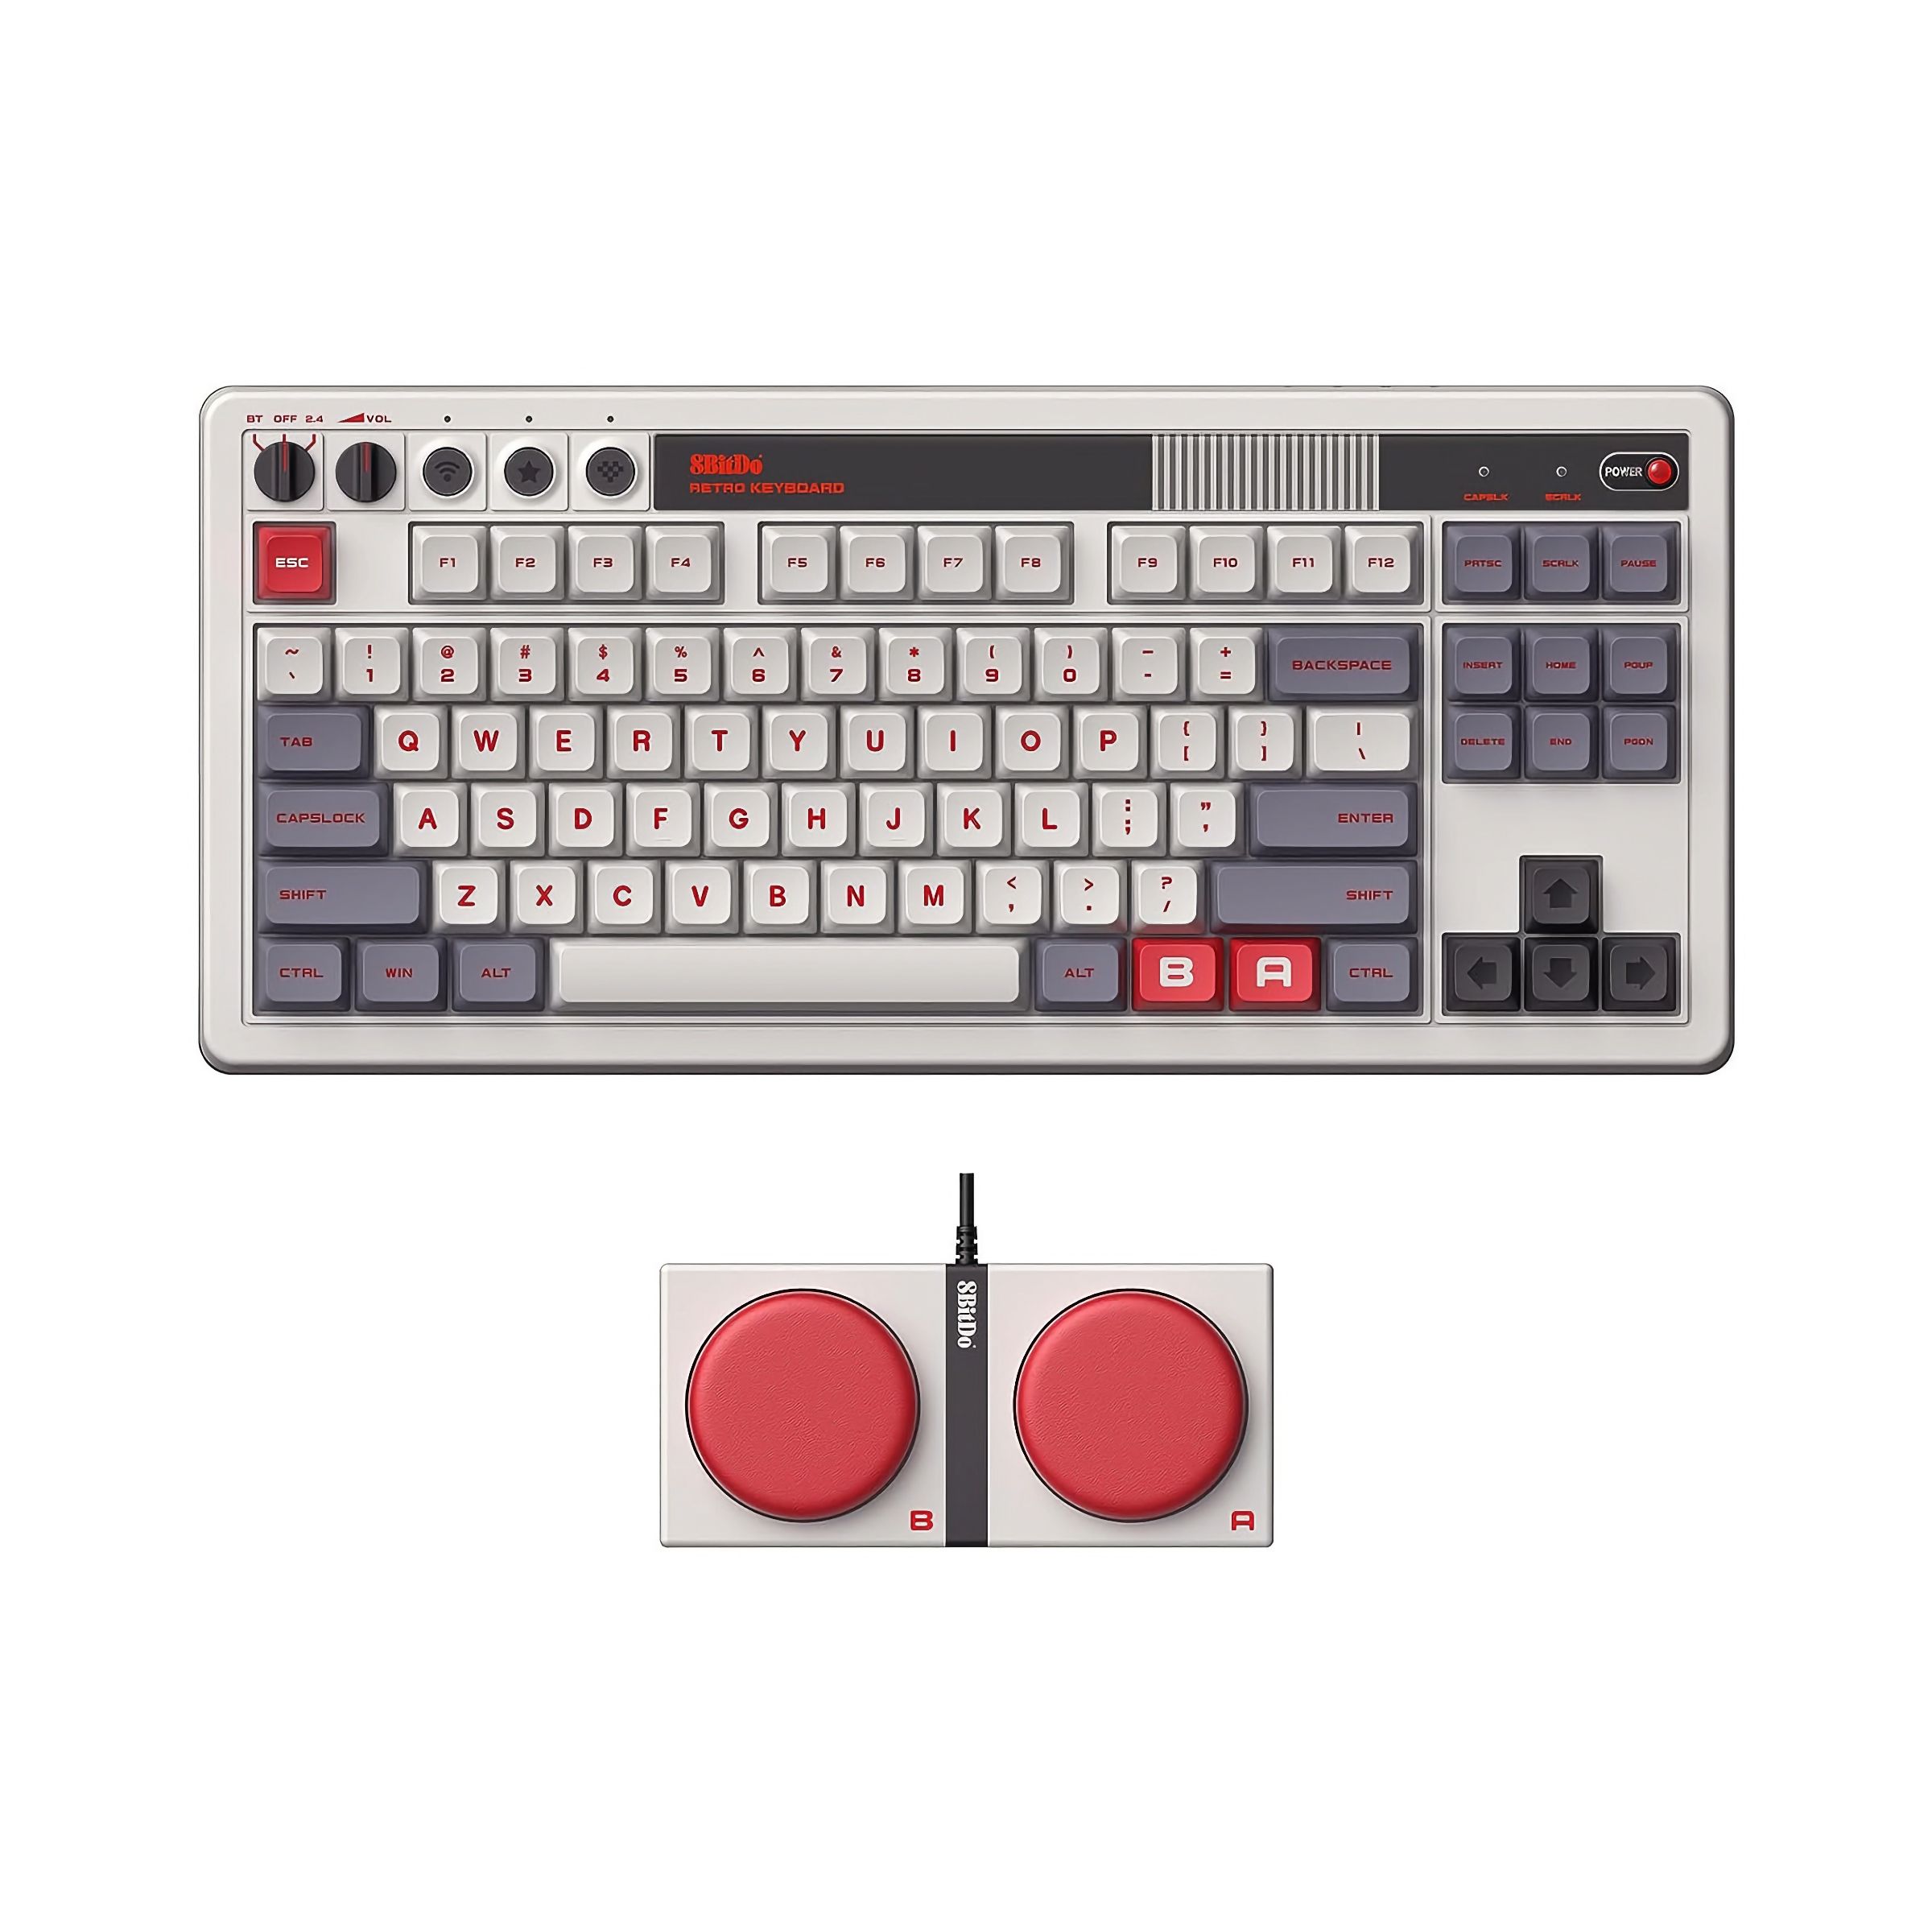 A NES-inspired mechanical keyboard with red, grey, and black buttons.